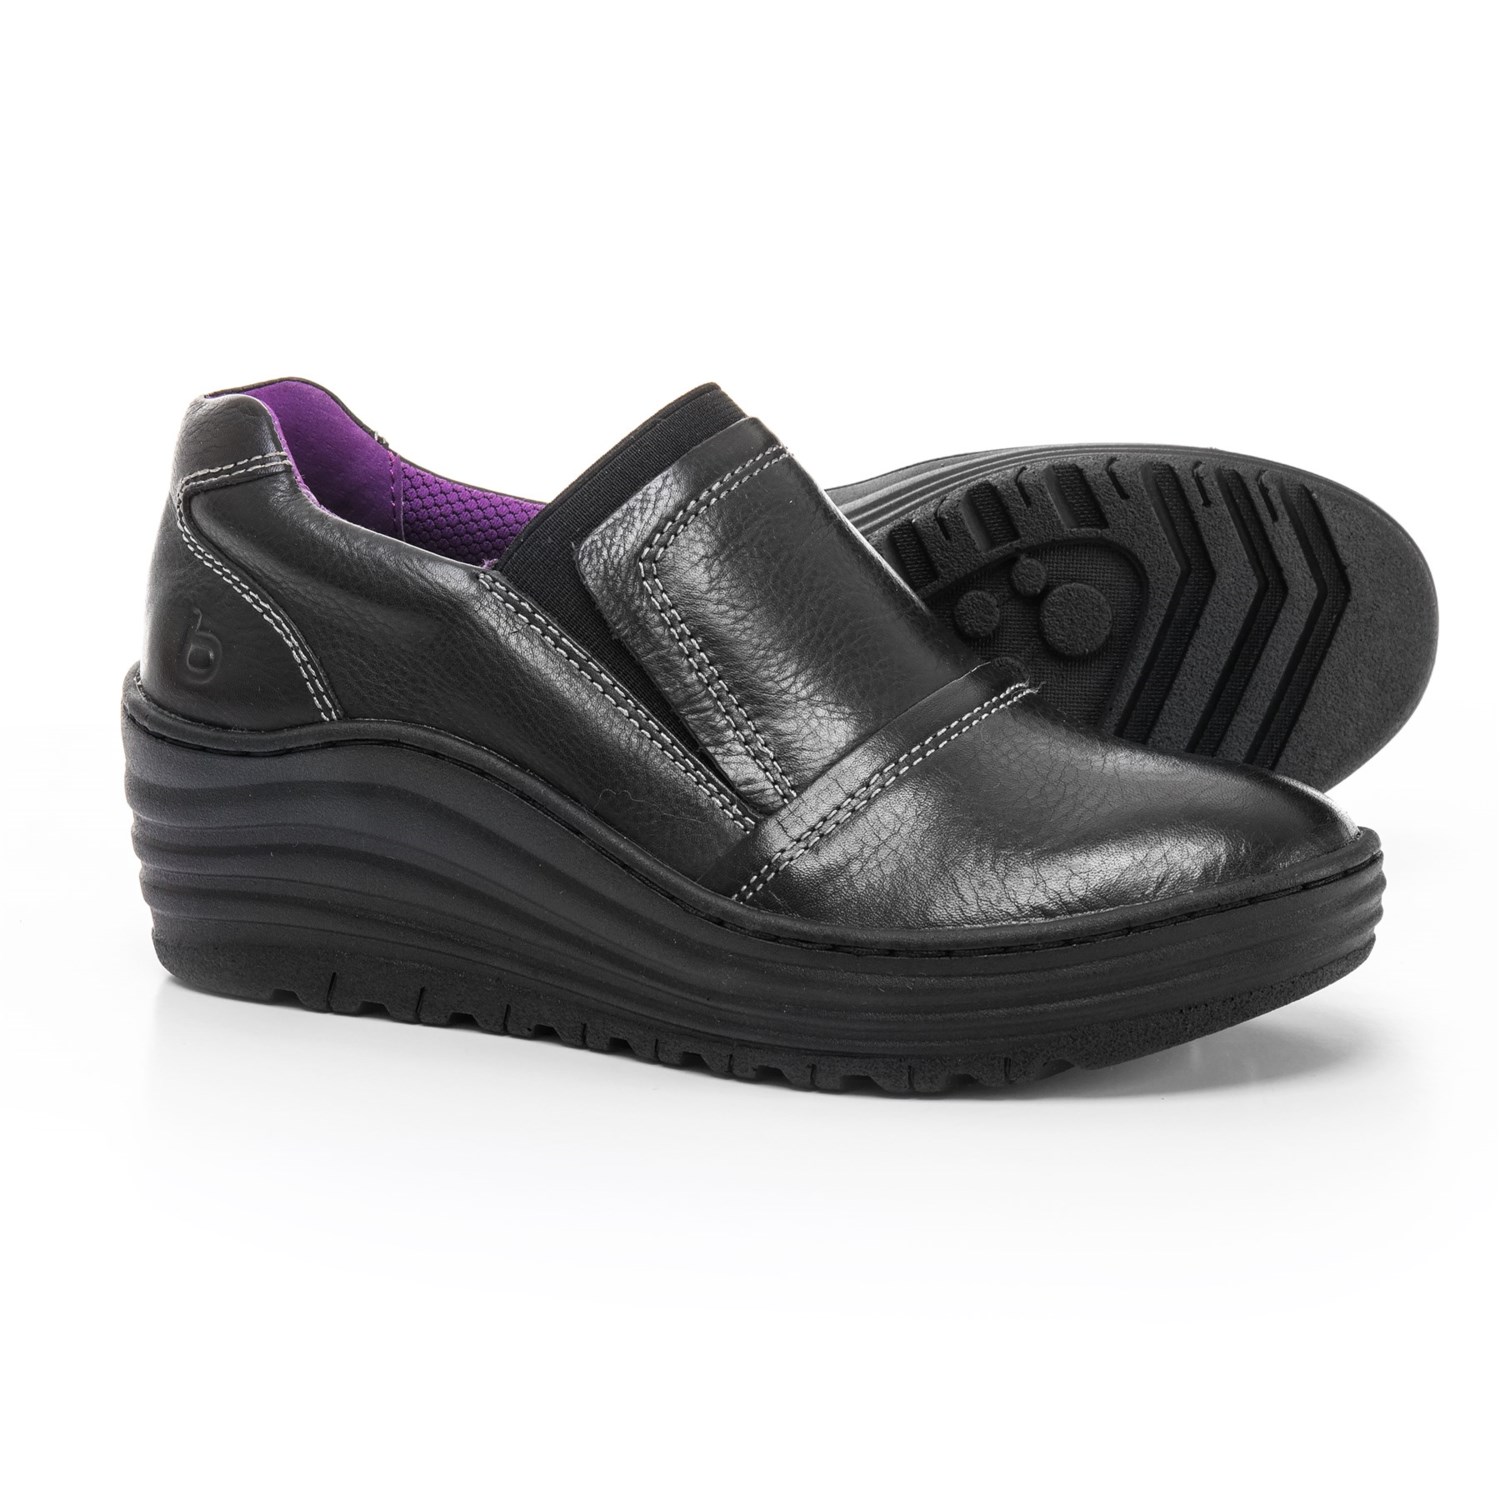 Bionica Grinnell Leather Wedge Shoes – Slip-Ons (For Women)